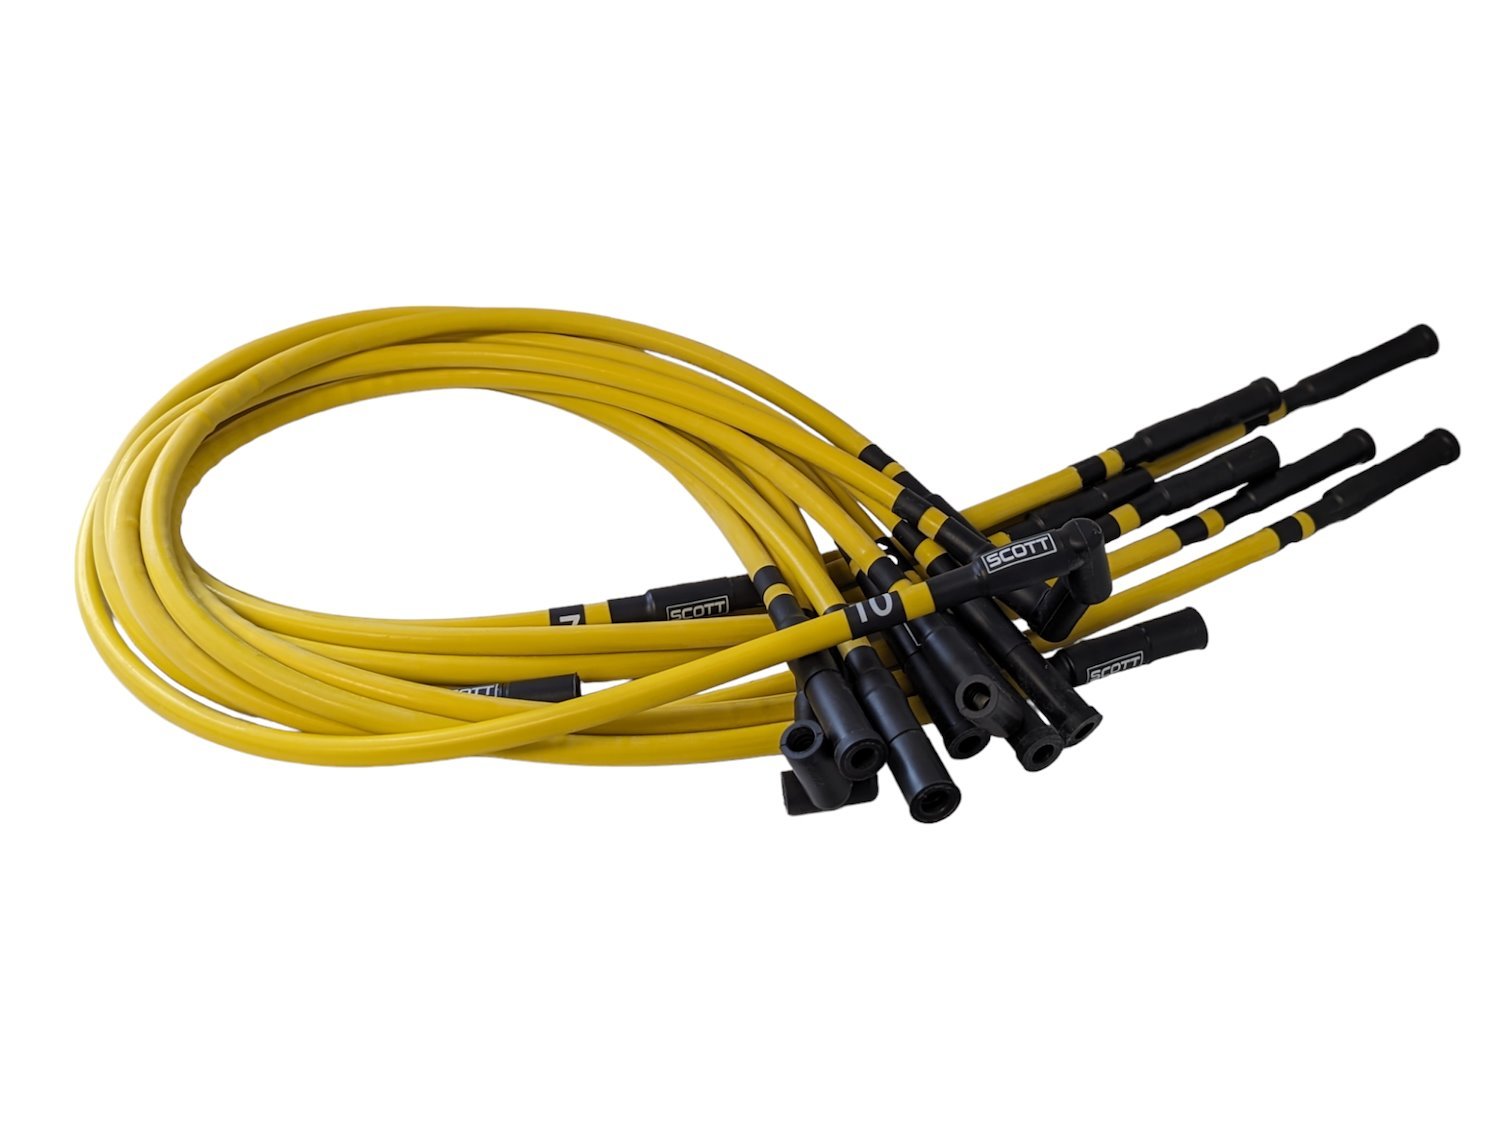 SPW-CH-690-I-7 High-Performance Silicone-Sleeved Spark Plug Wire Set for Dodge Viper (Gen-1) [Yellow]